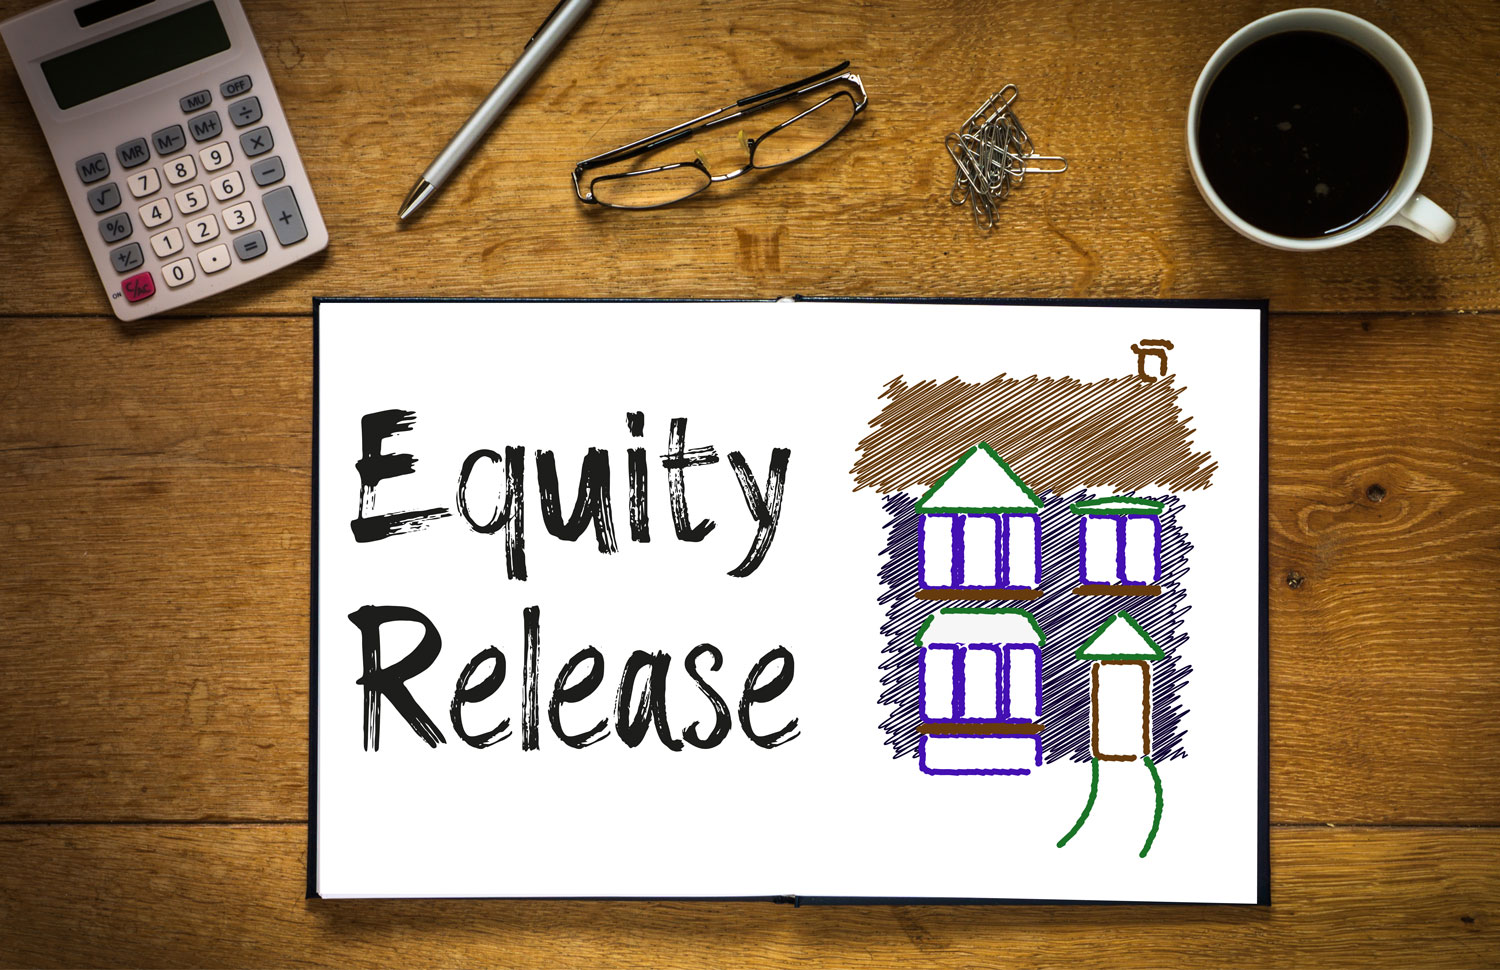 Equity release news 2023 main image